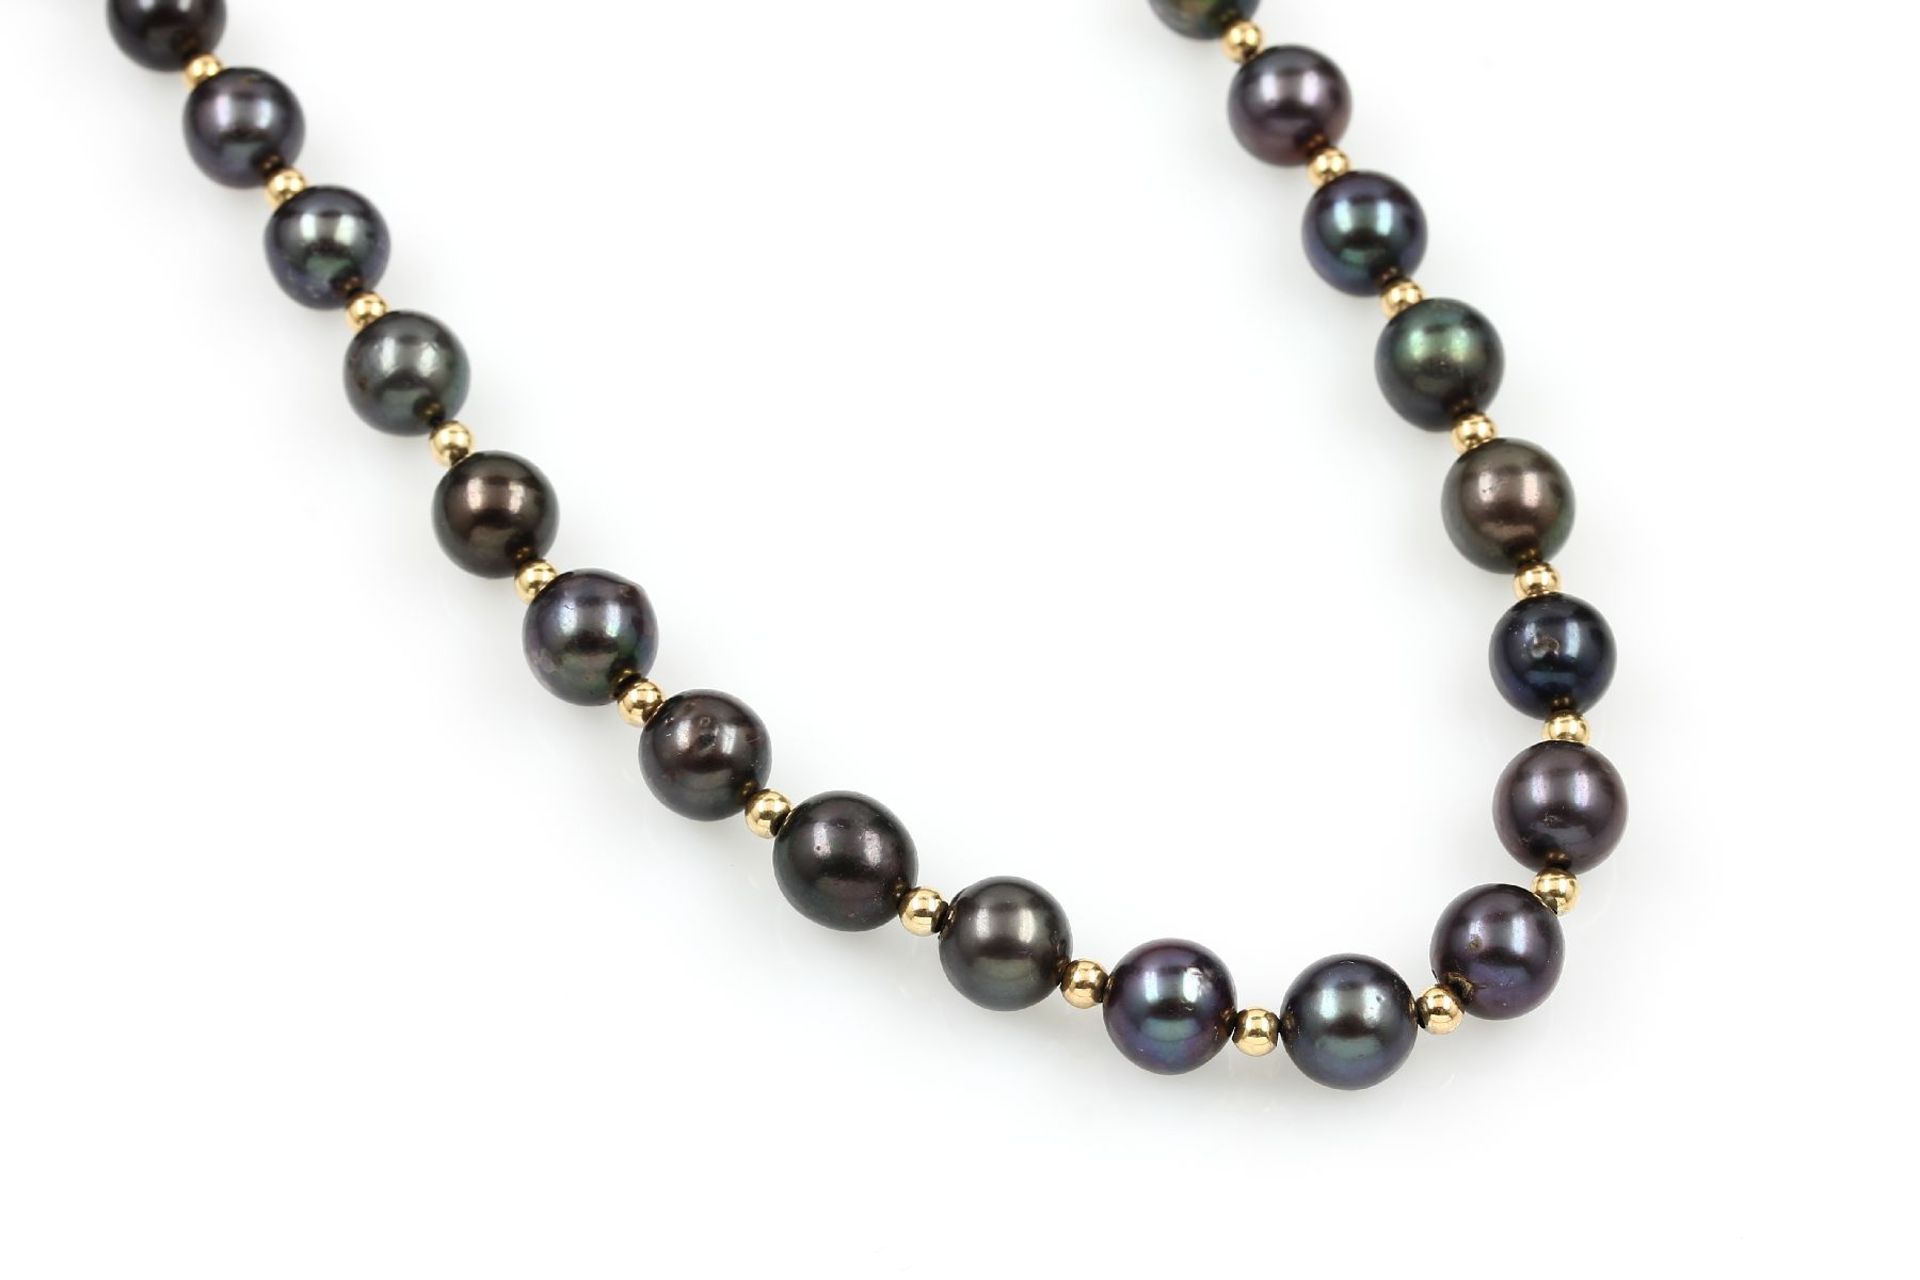 Necklace with cultured tahitian pearls , dark grey cultured tahitian pearls, diam. approx. 8.2 mm,